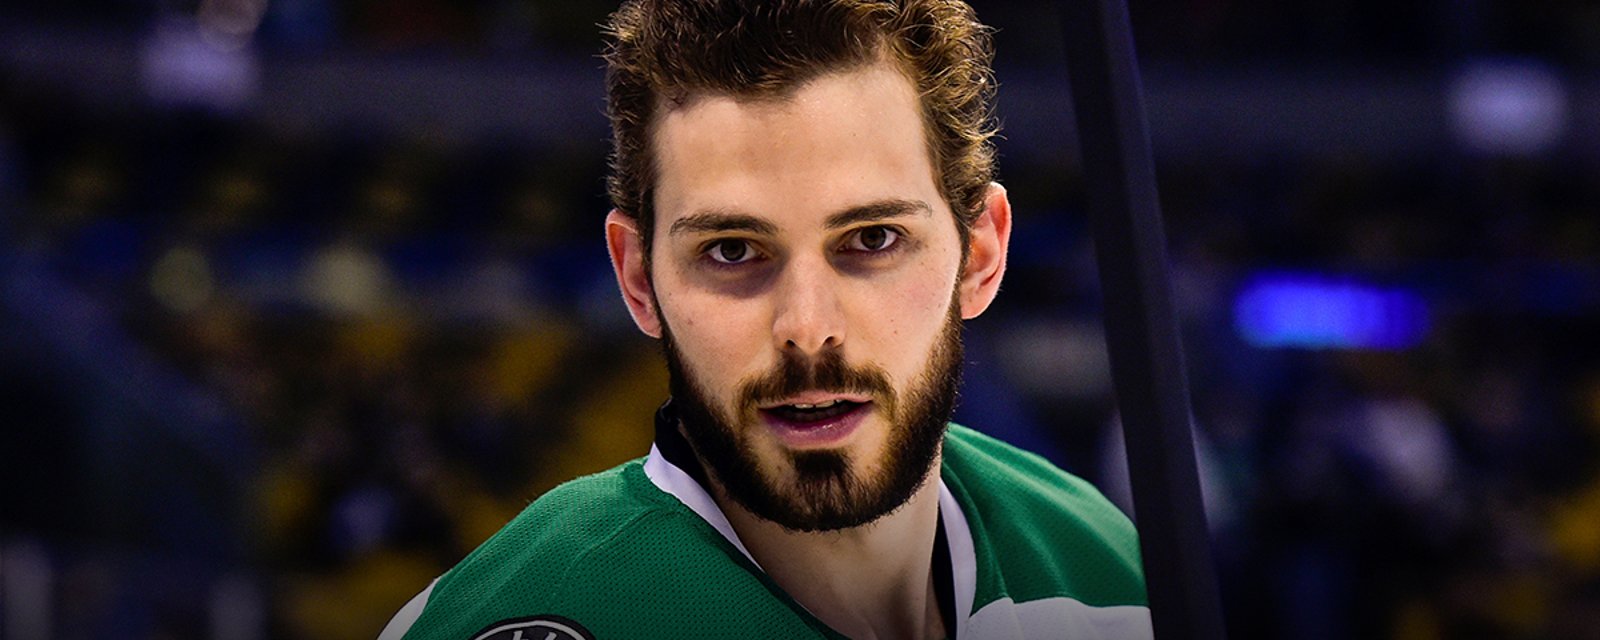 Must See: Seguin takes on local radio hosts in 3 on 1 challenge